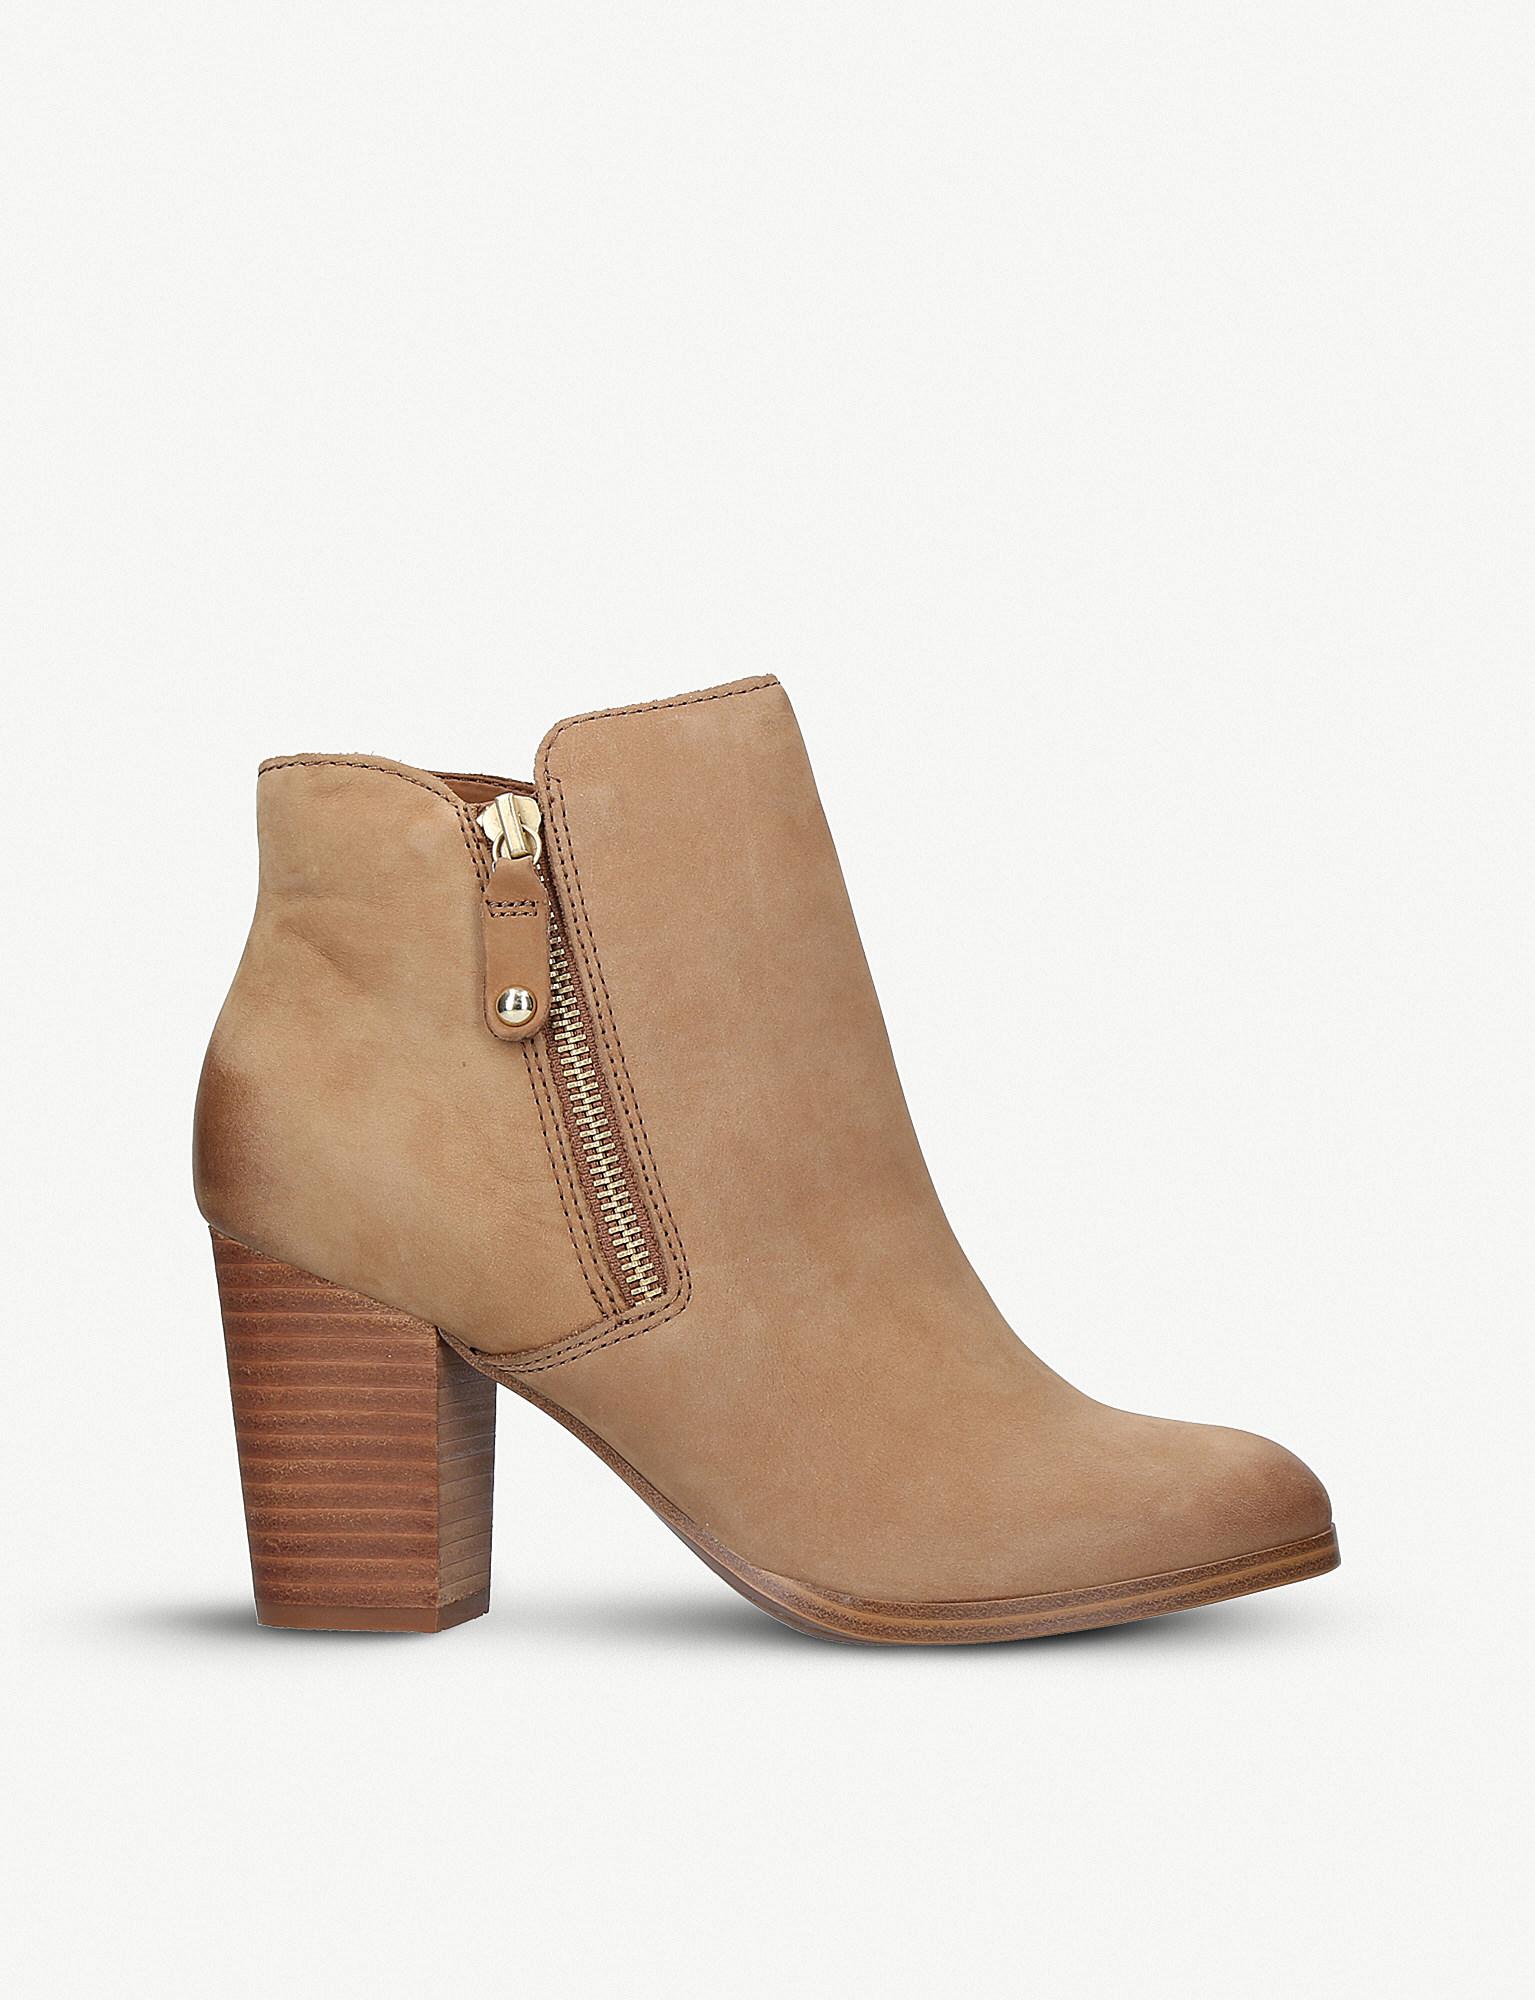 ALDO Naedia Leather Ankle Boots in Brown | Lyst